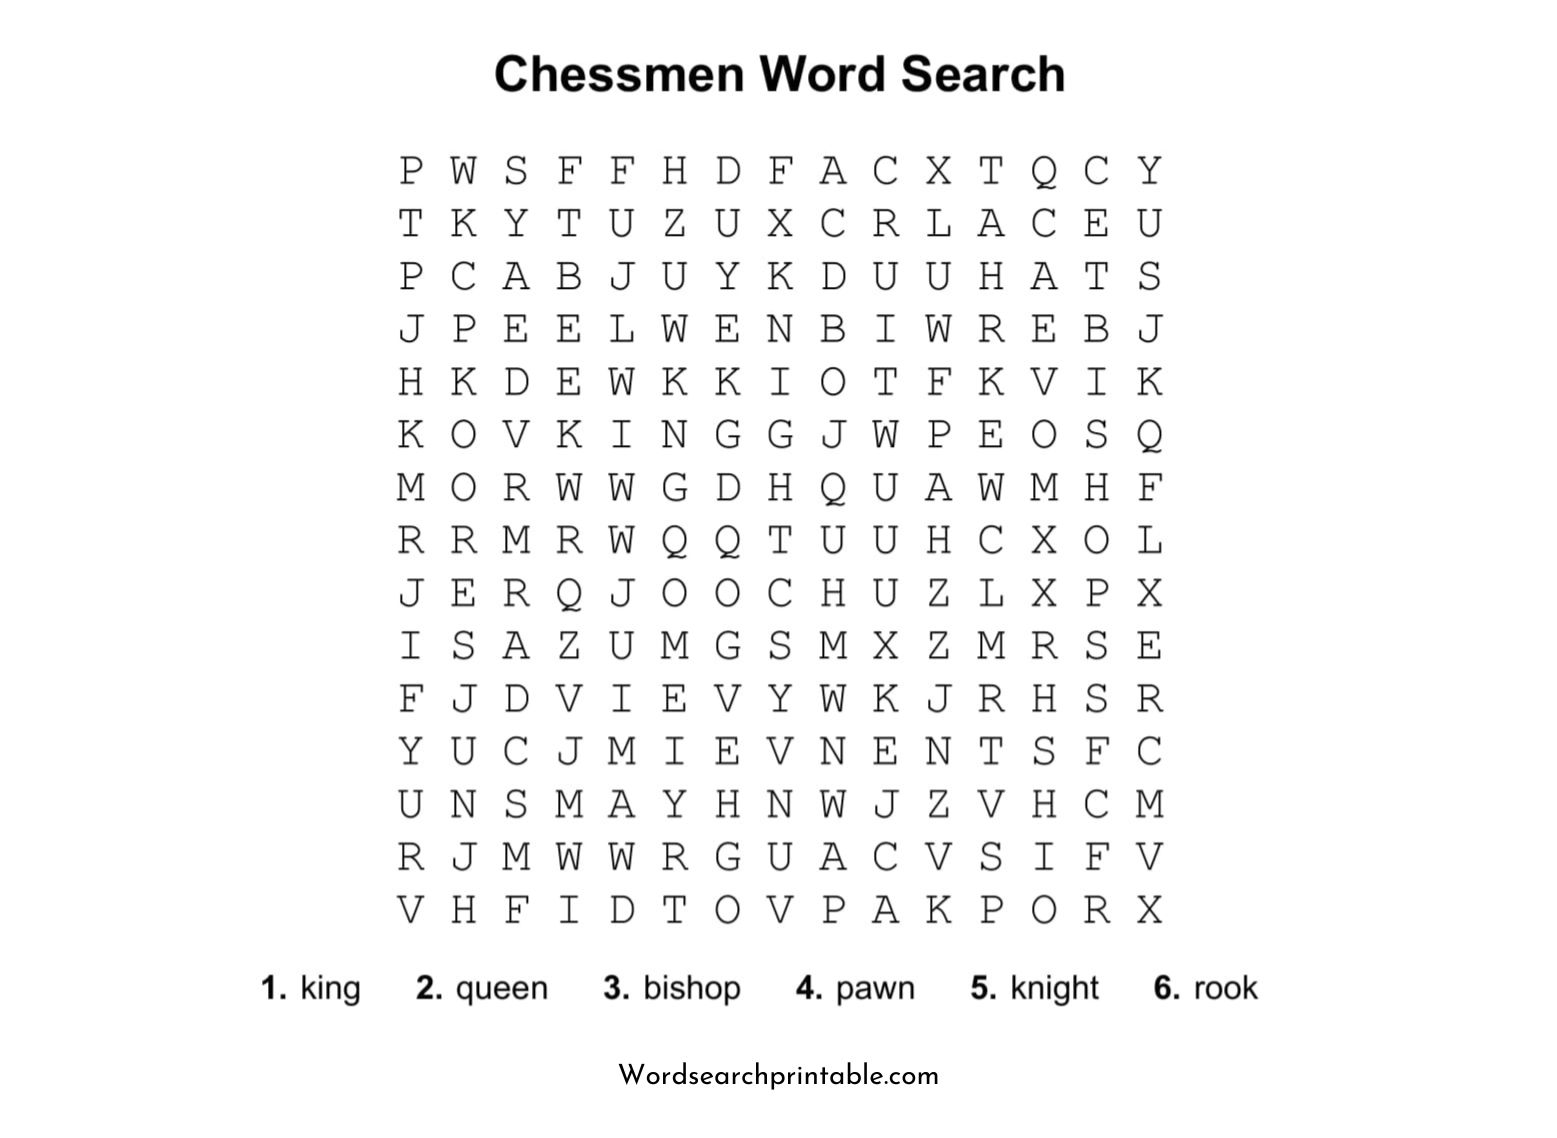 chessmen word search puzzle